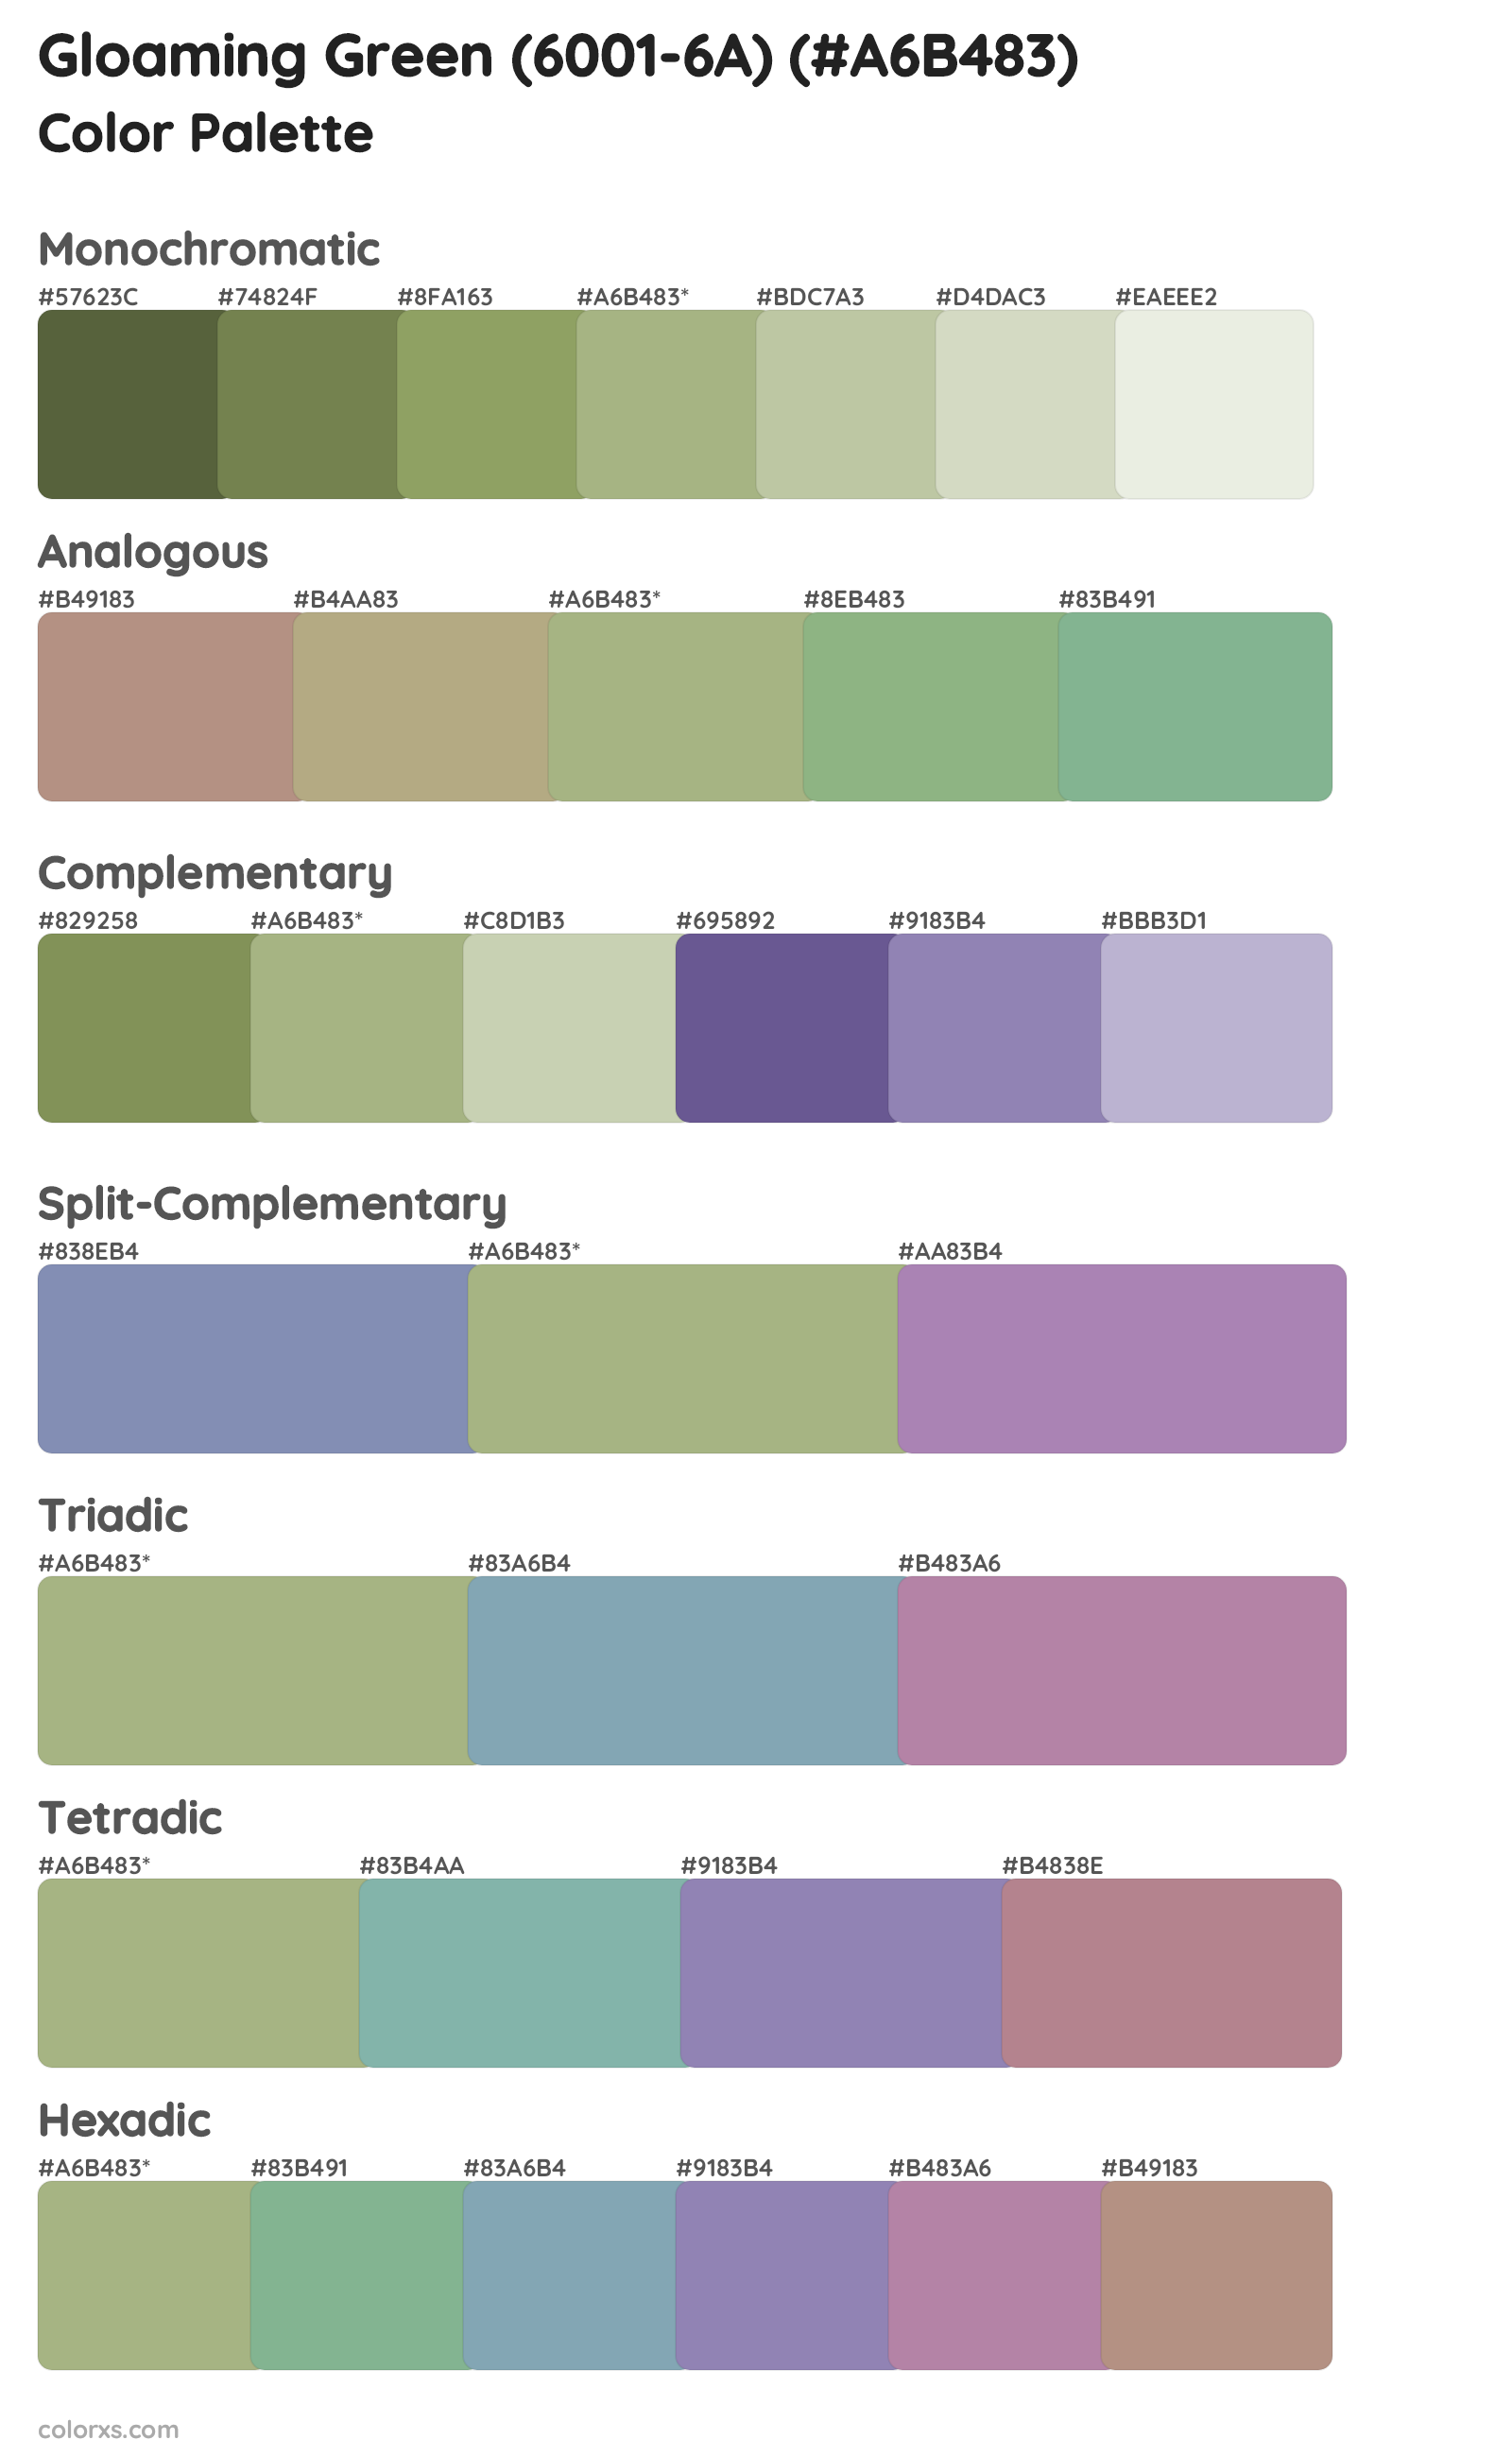 Gloaming Green (6001-6A) Color Scheme Palettes